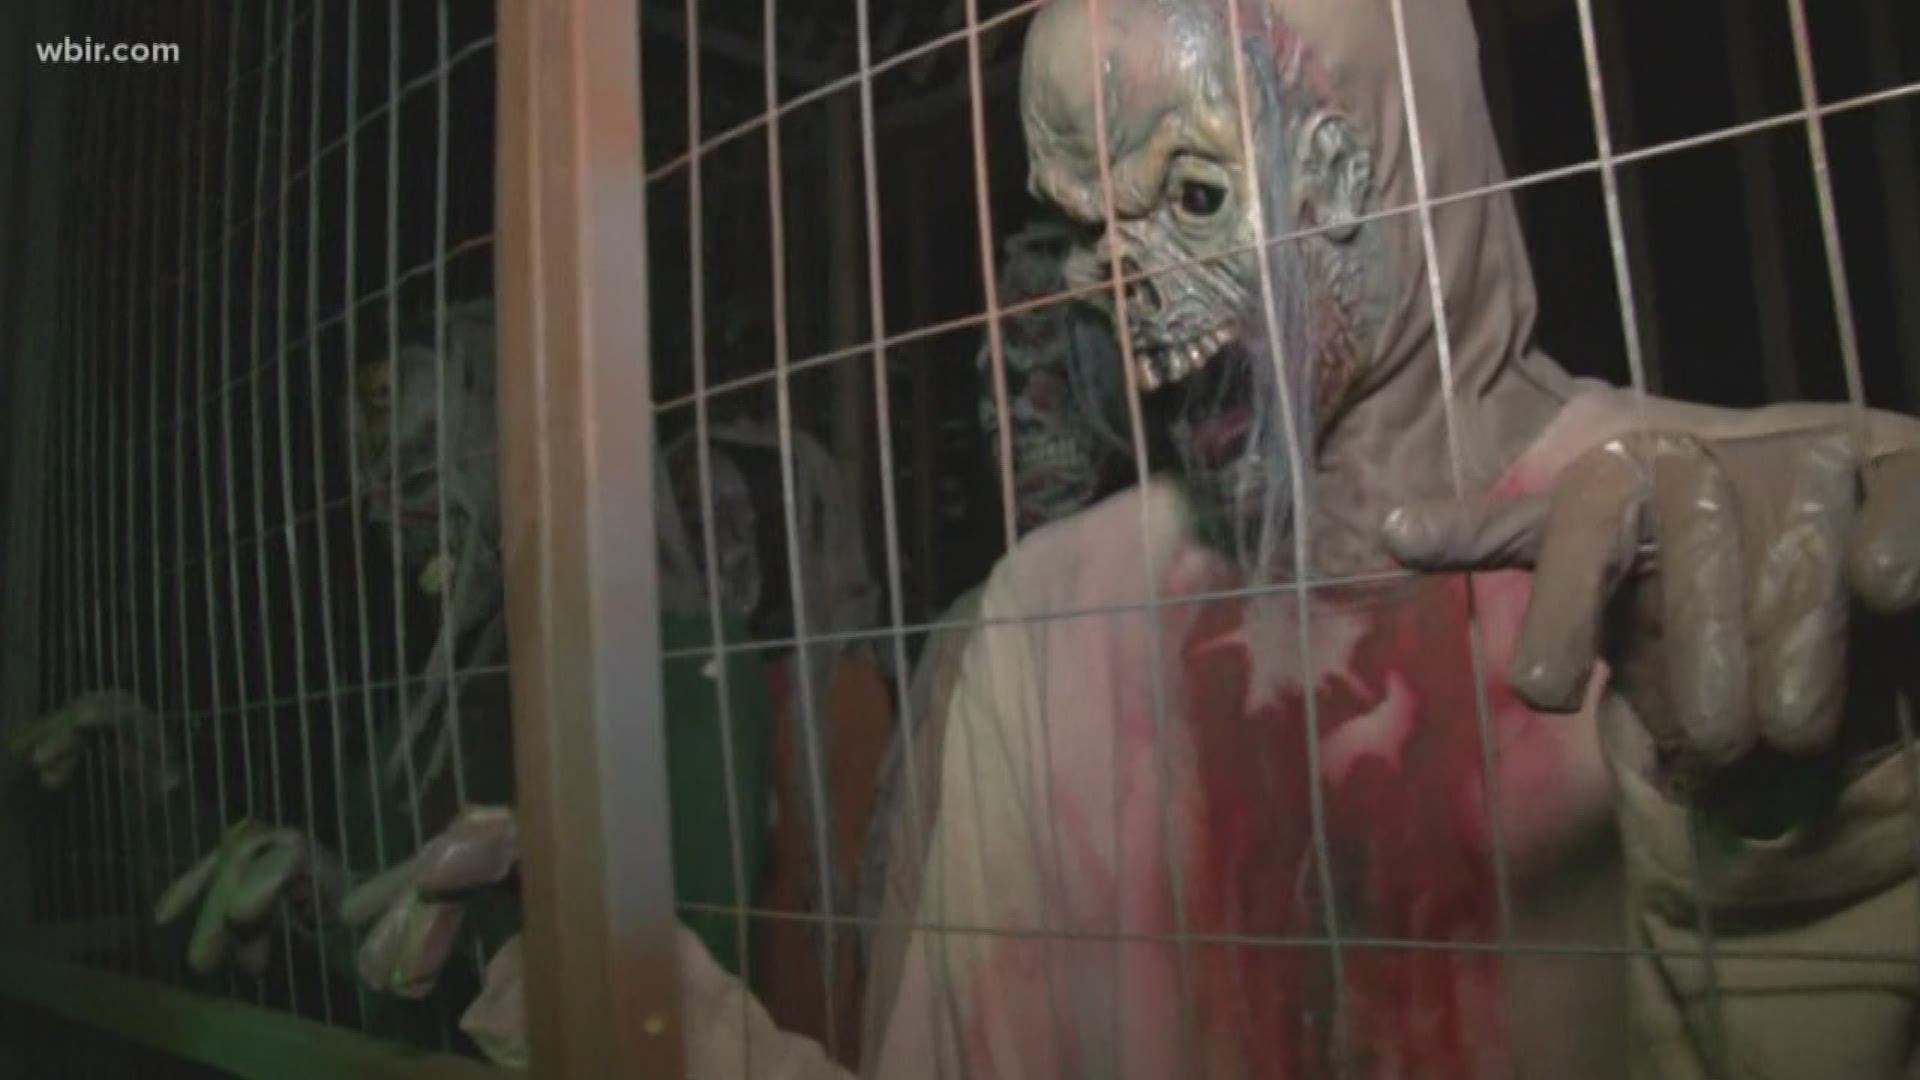 The time has come for haunted houses. But there's one family in Knoxville that not only likes to scare people but are doing it for a good cause.